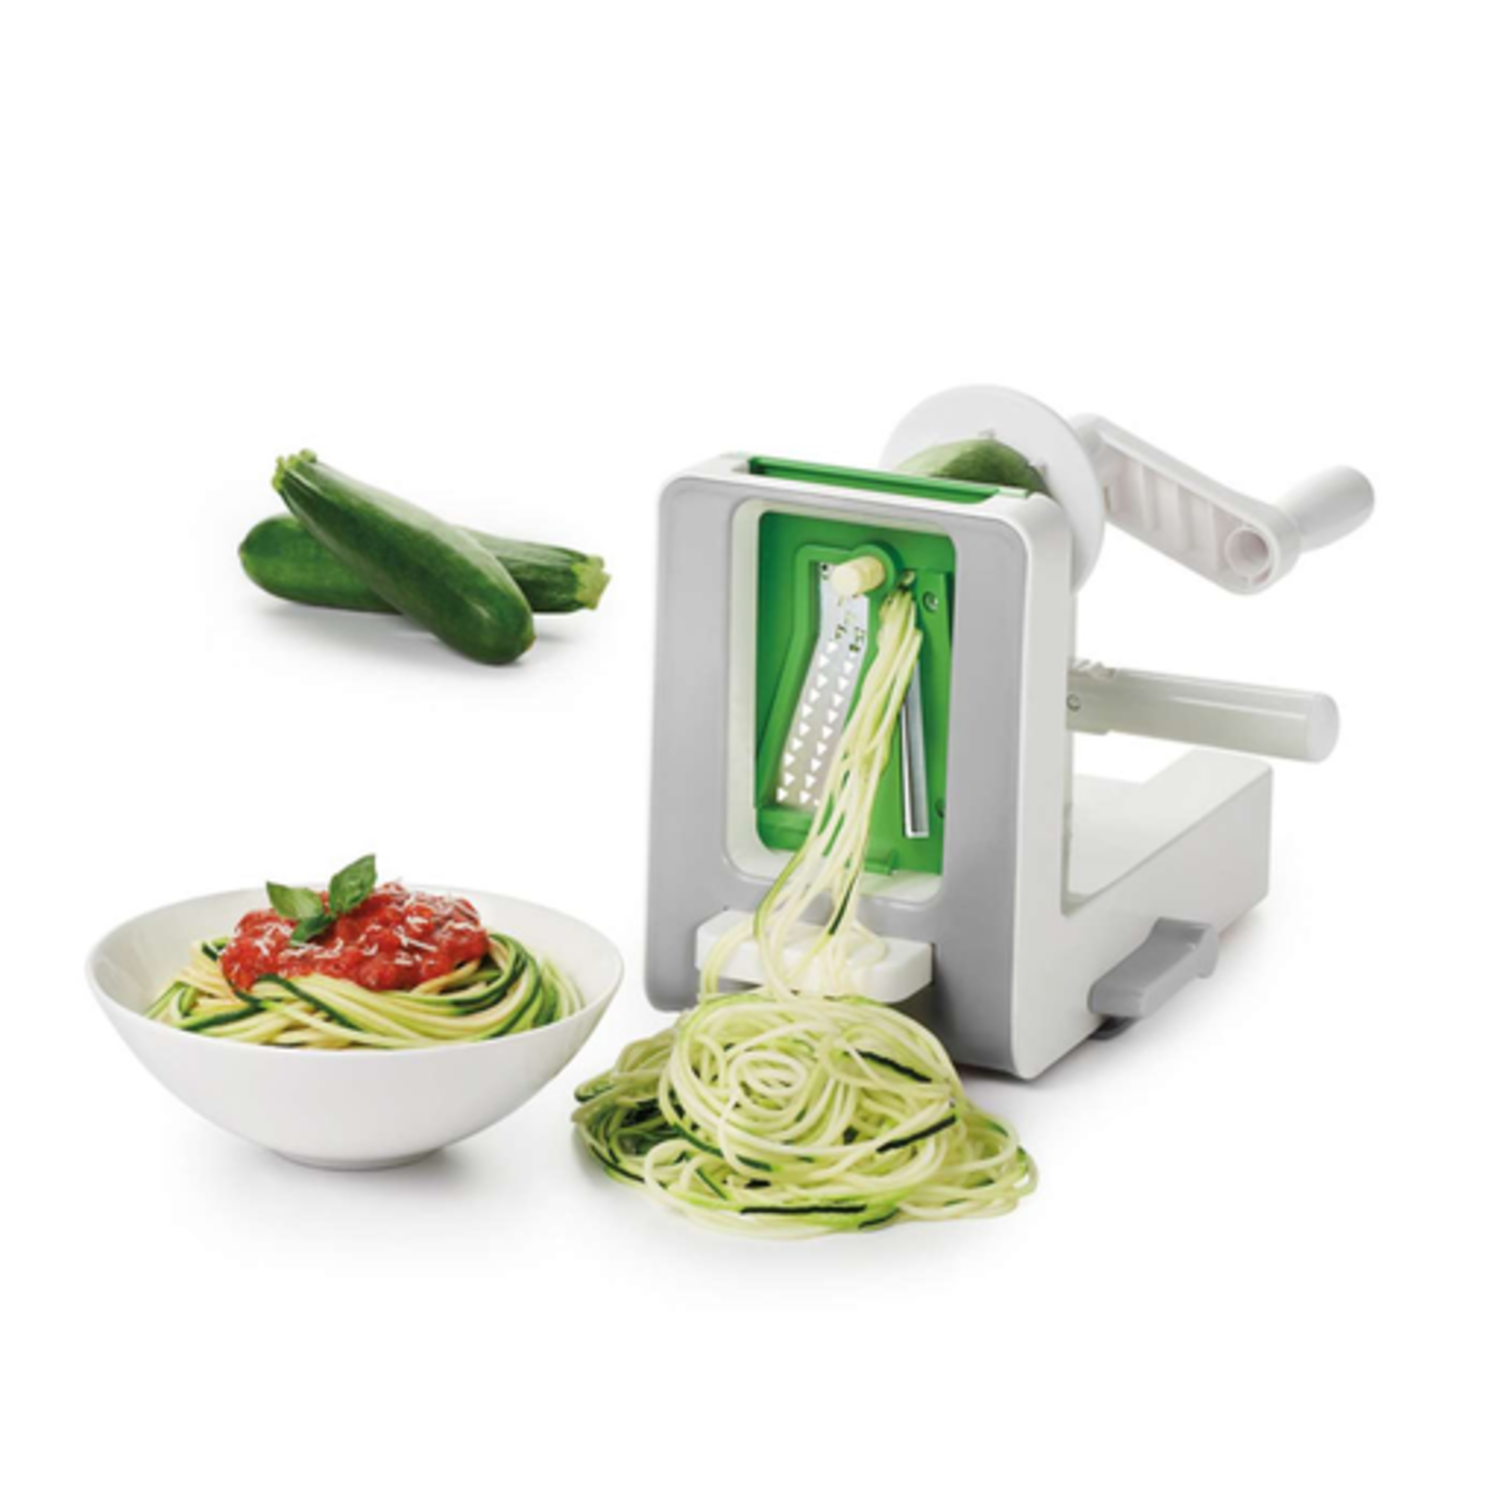 OXO OXO Tabletop Spiralizer with 3 blades